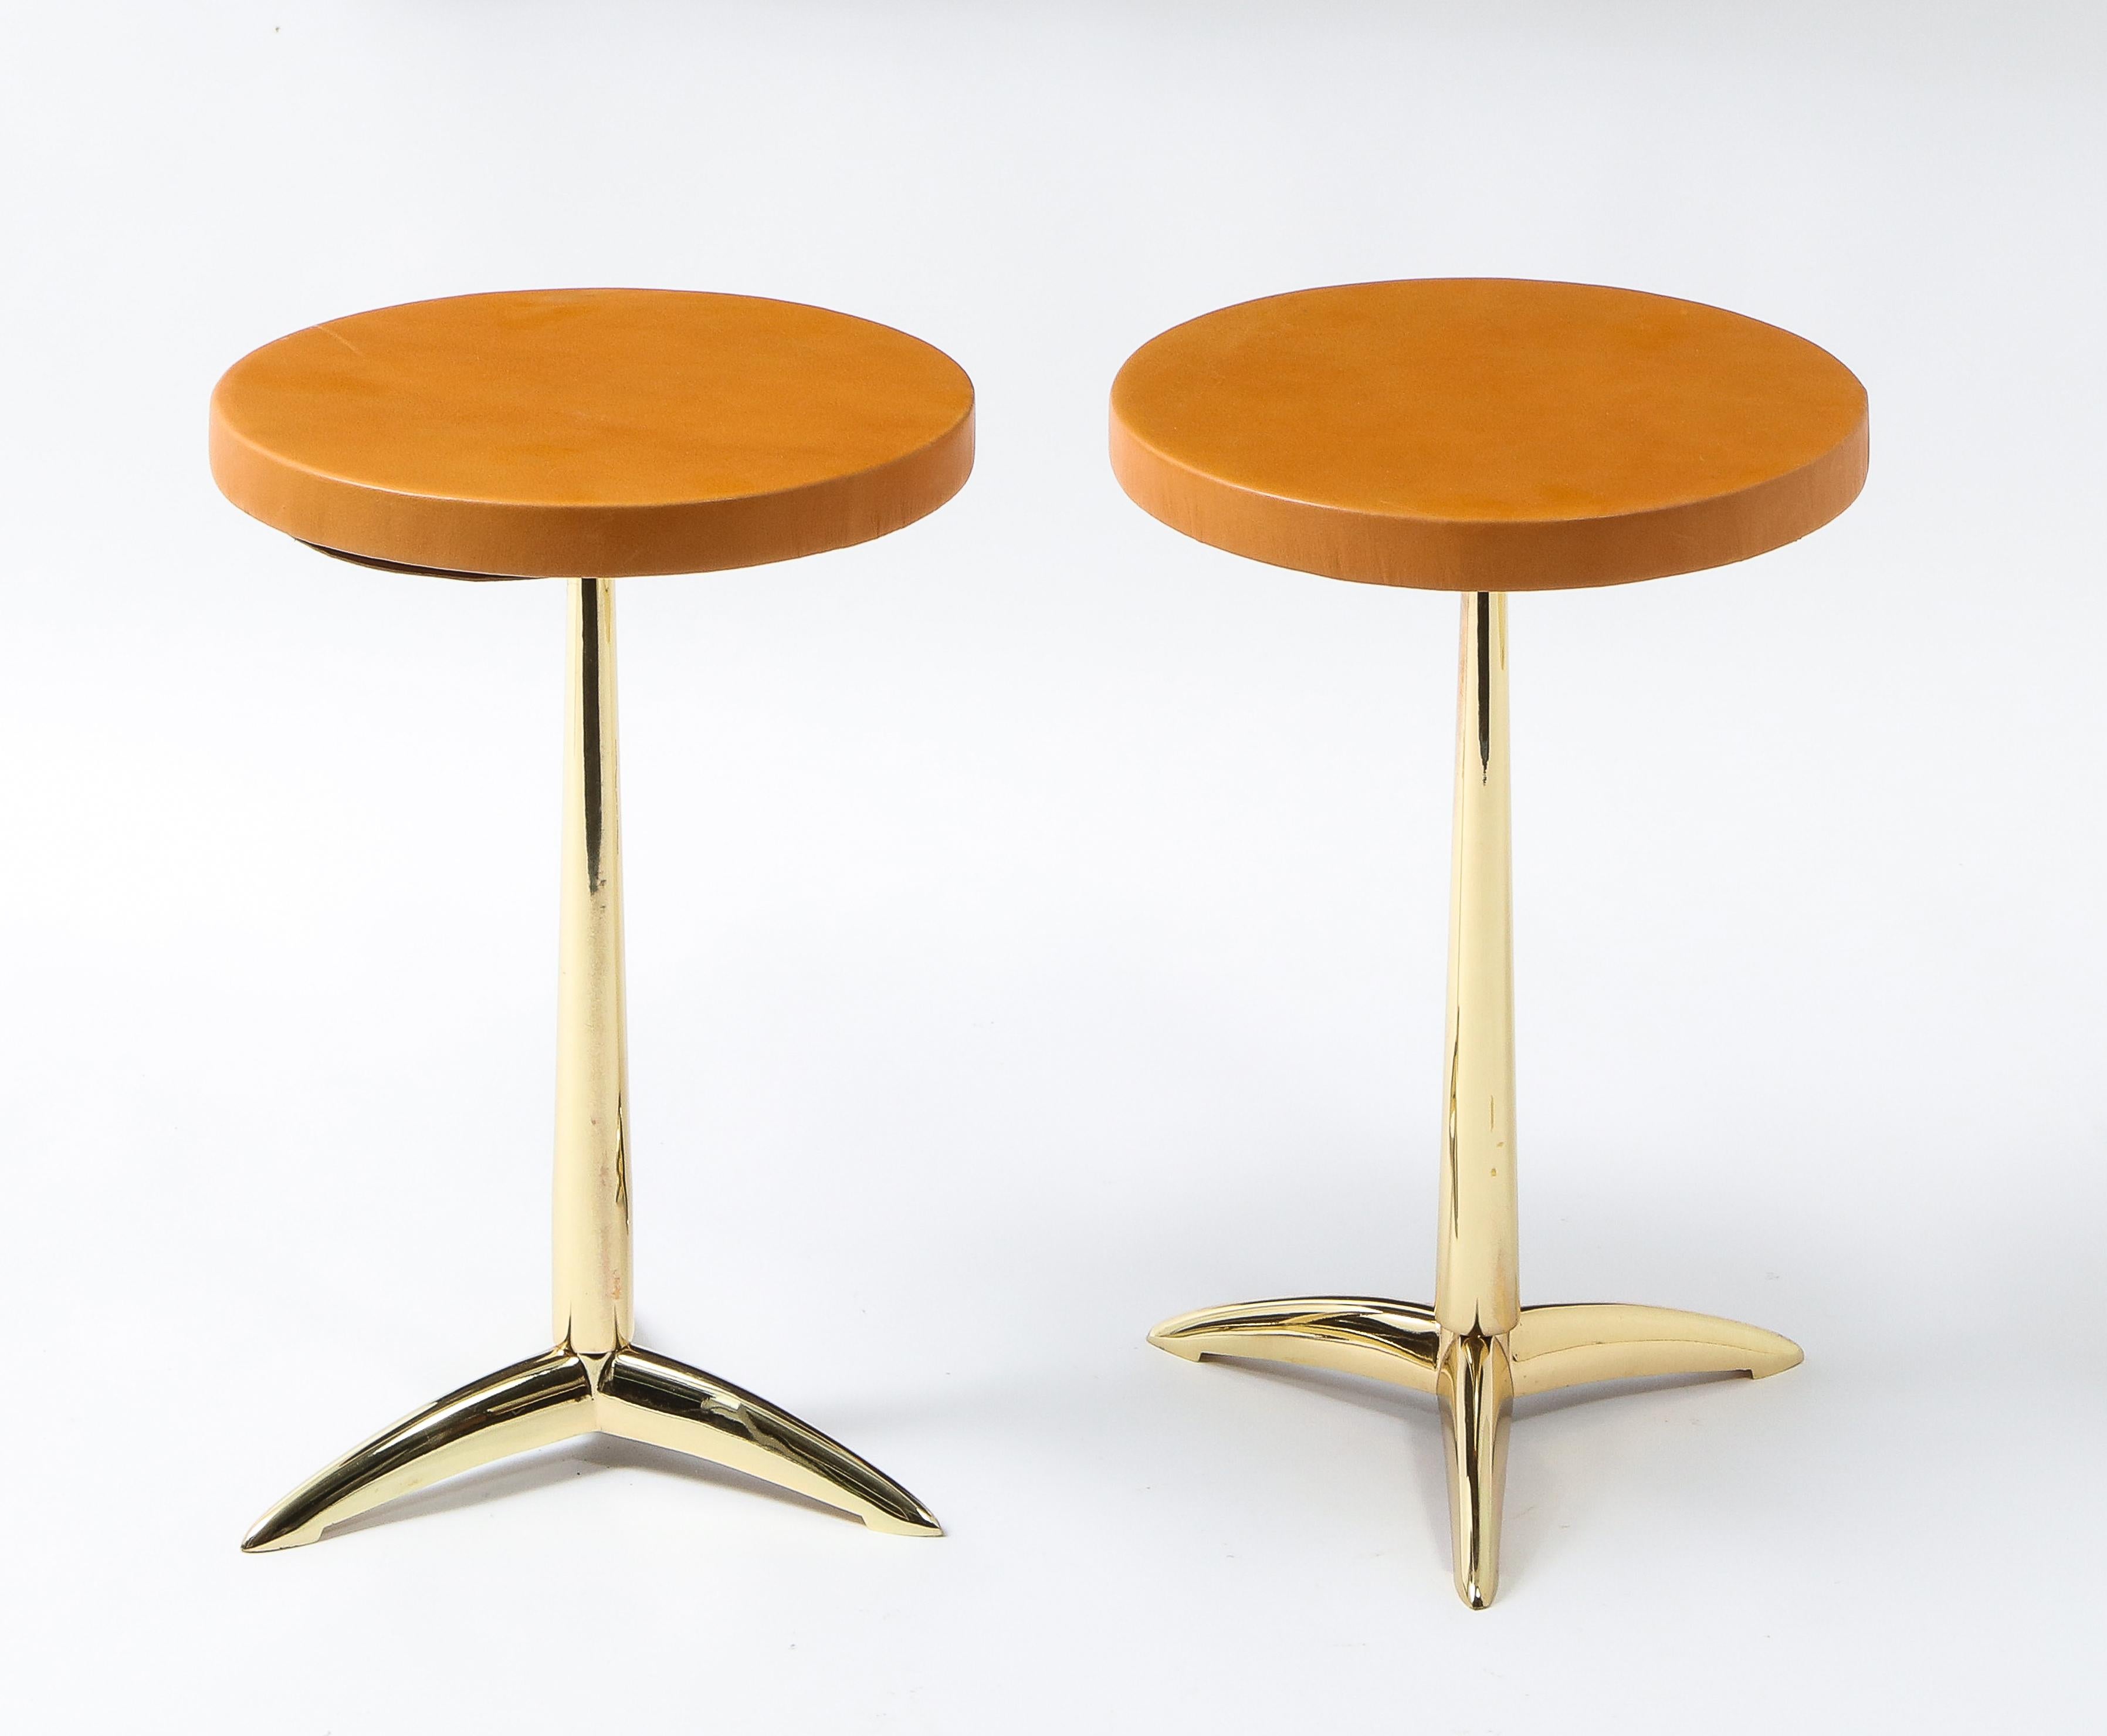 Classic tripod drink stands in brass with leather-covered tops.